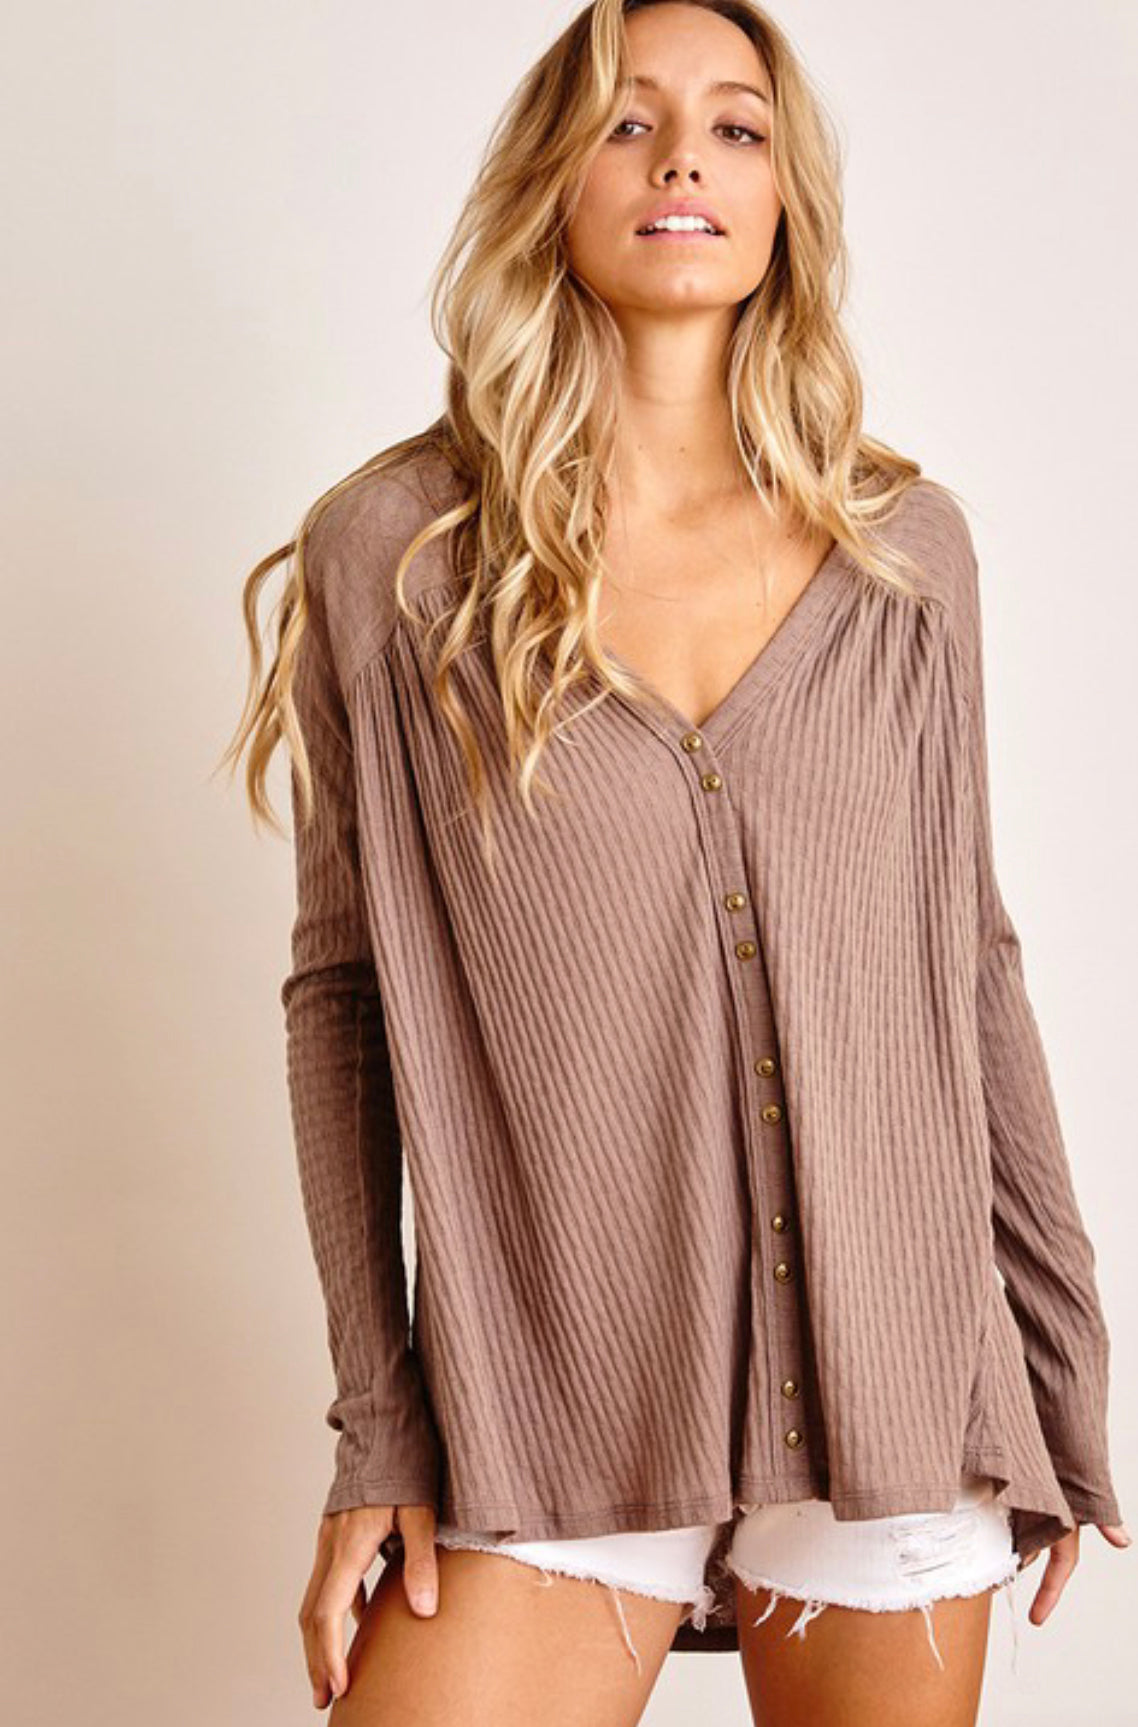 Eternity Top Warm Taupe